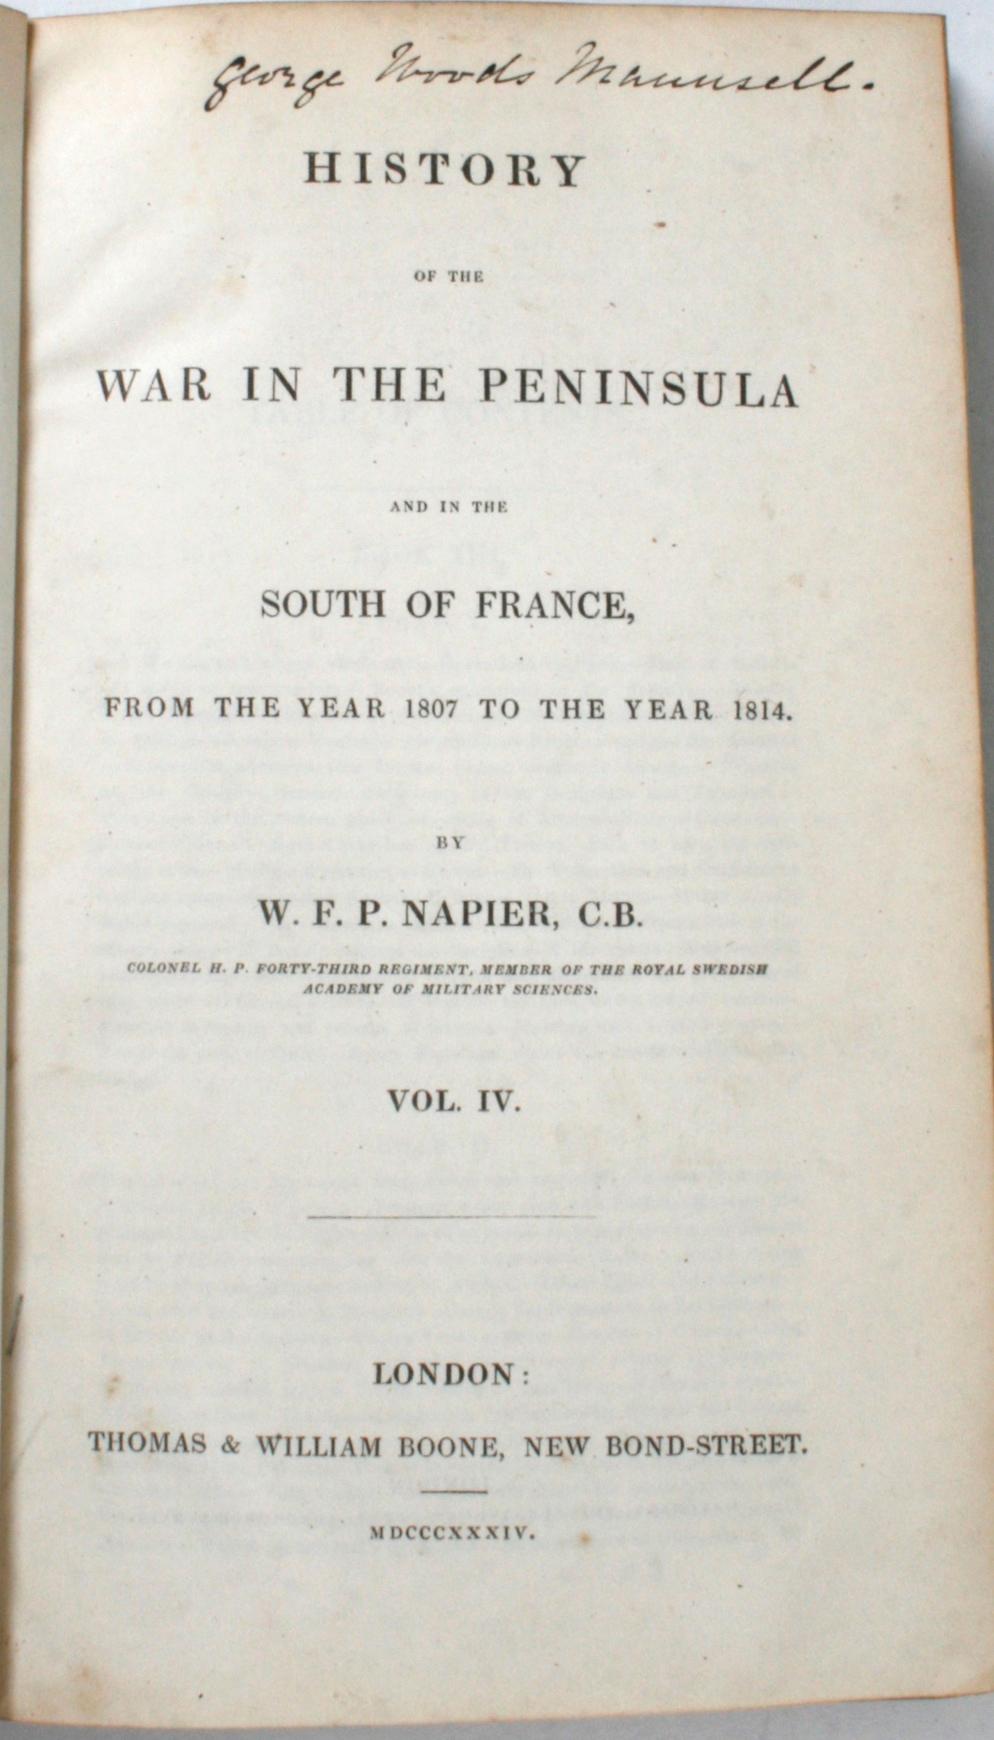 History of the War in the Peninsula by W.F.P. Napier with Lord Elgin Provenance For Sale 1